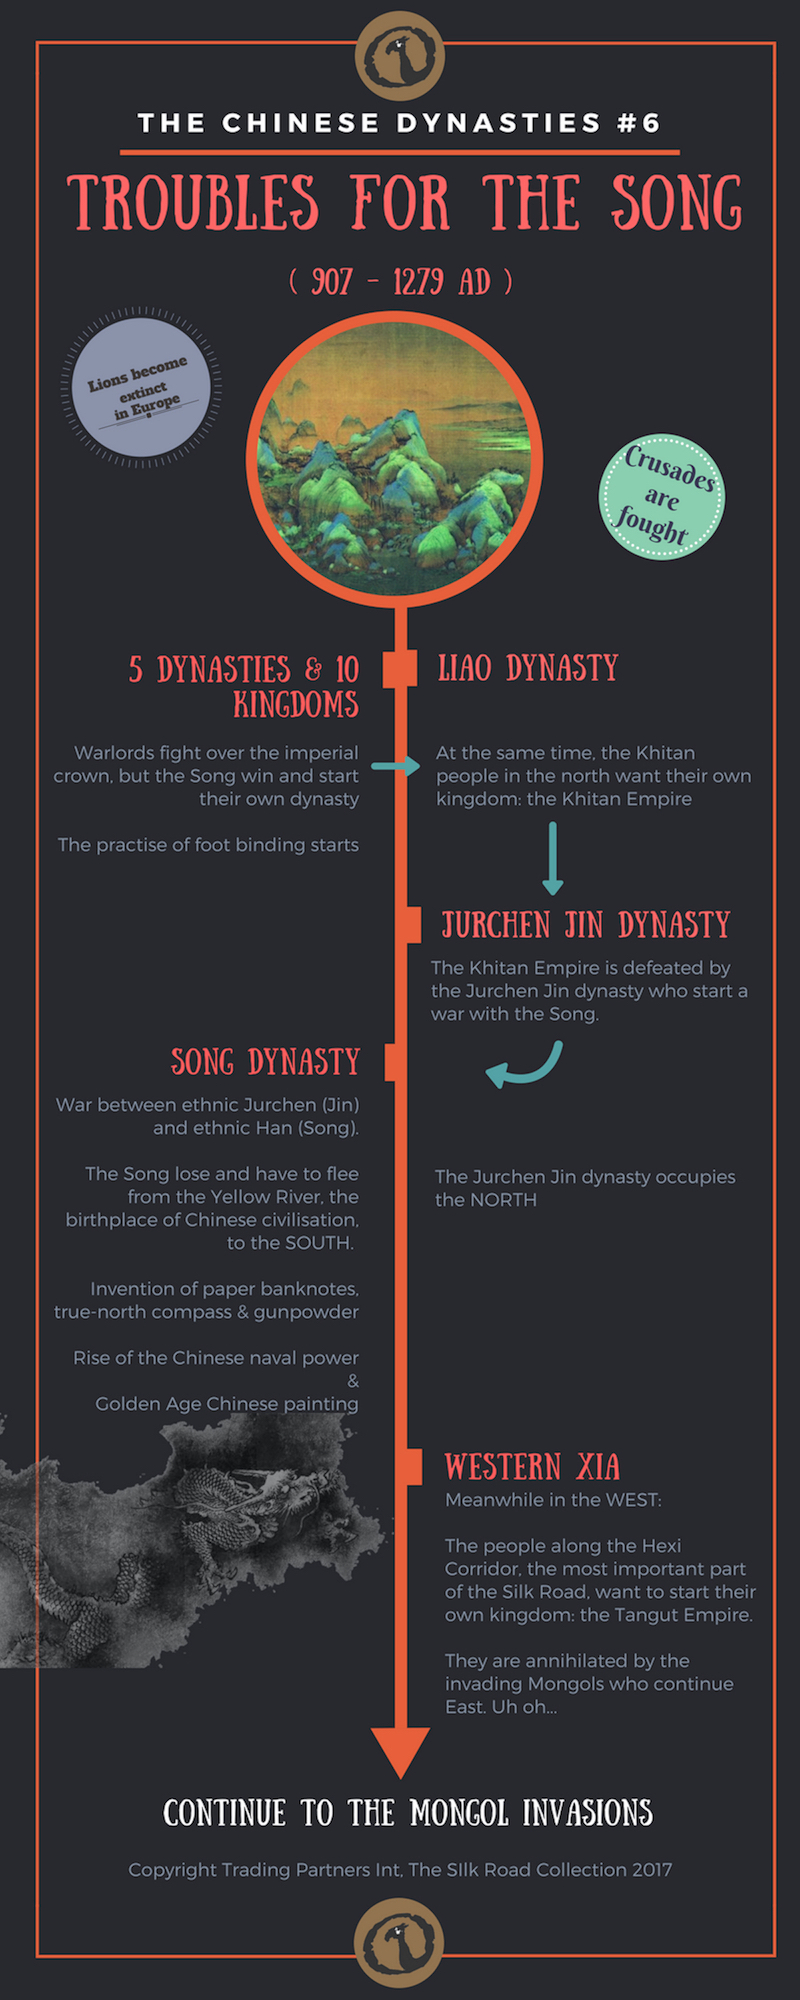 Timeline image of The Chinese Dynasties: Troubles for the Song